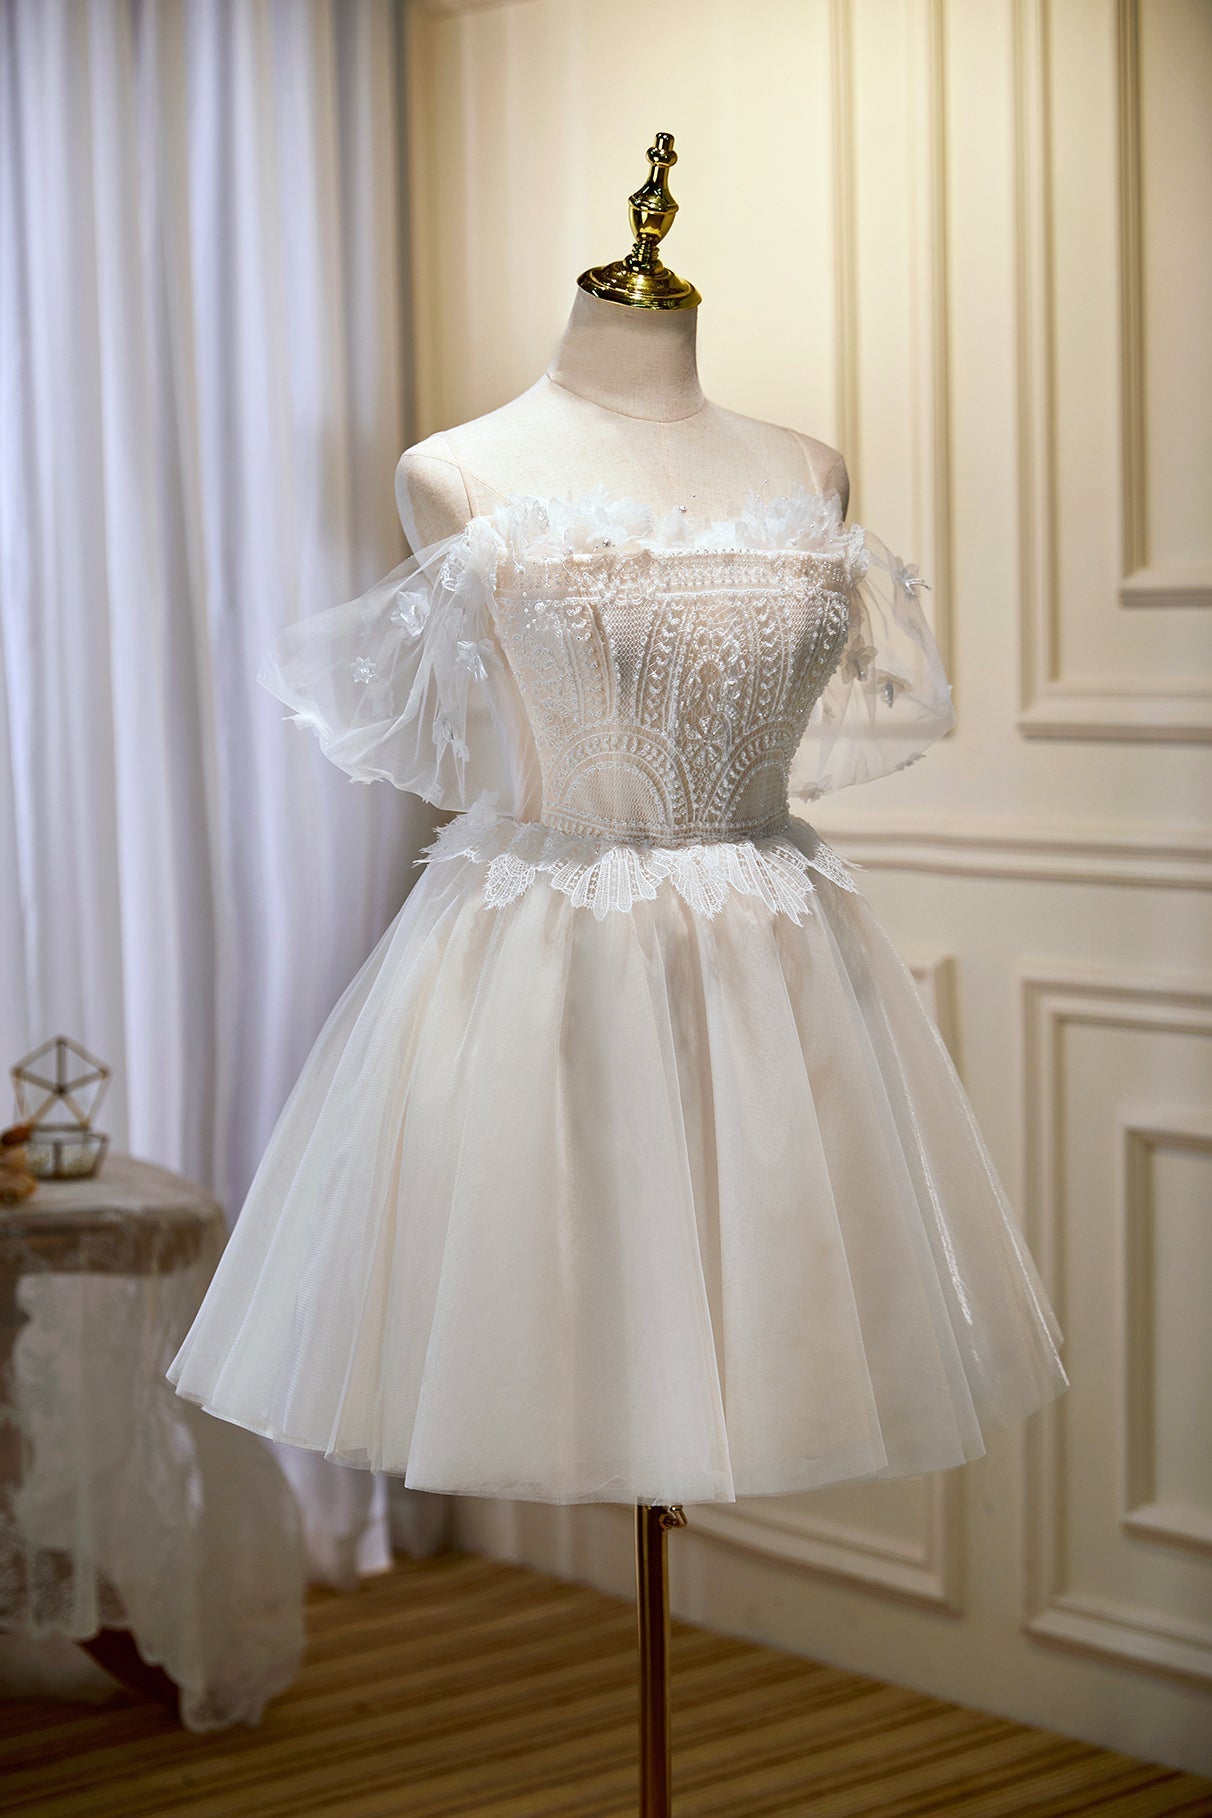 Party Dress Trends, Champagne Sweetheart Lace Tulle Party Dress, A-Line Homecoming Dress